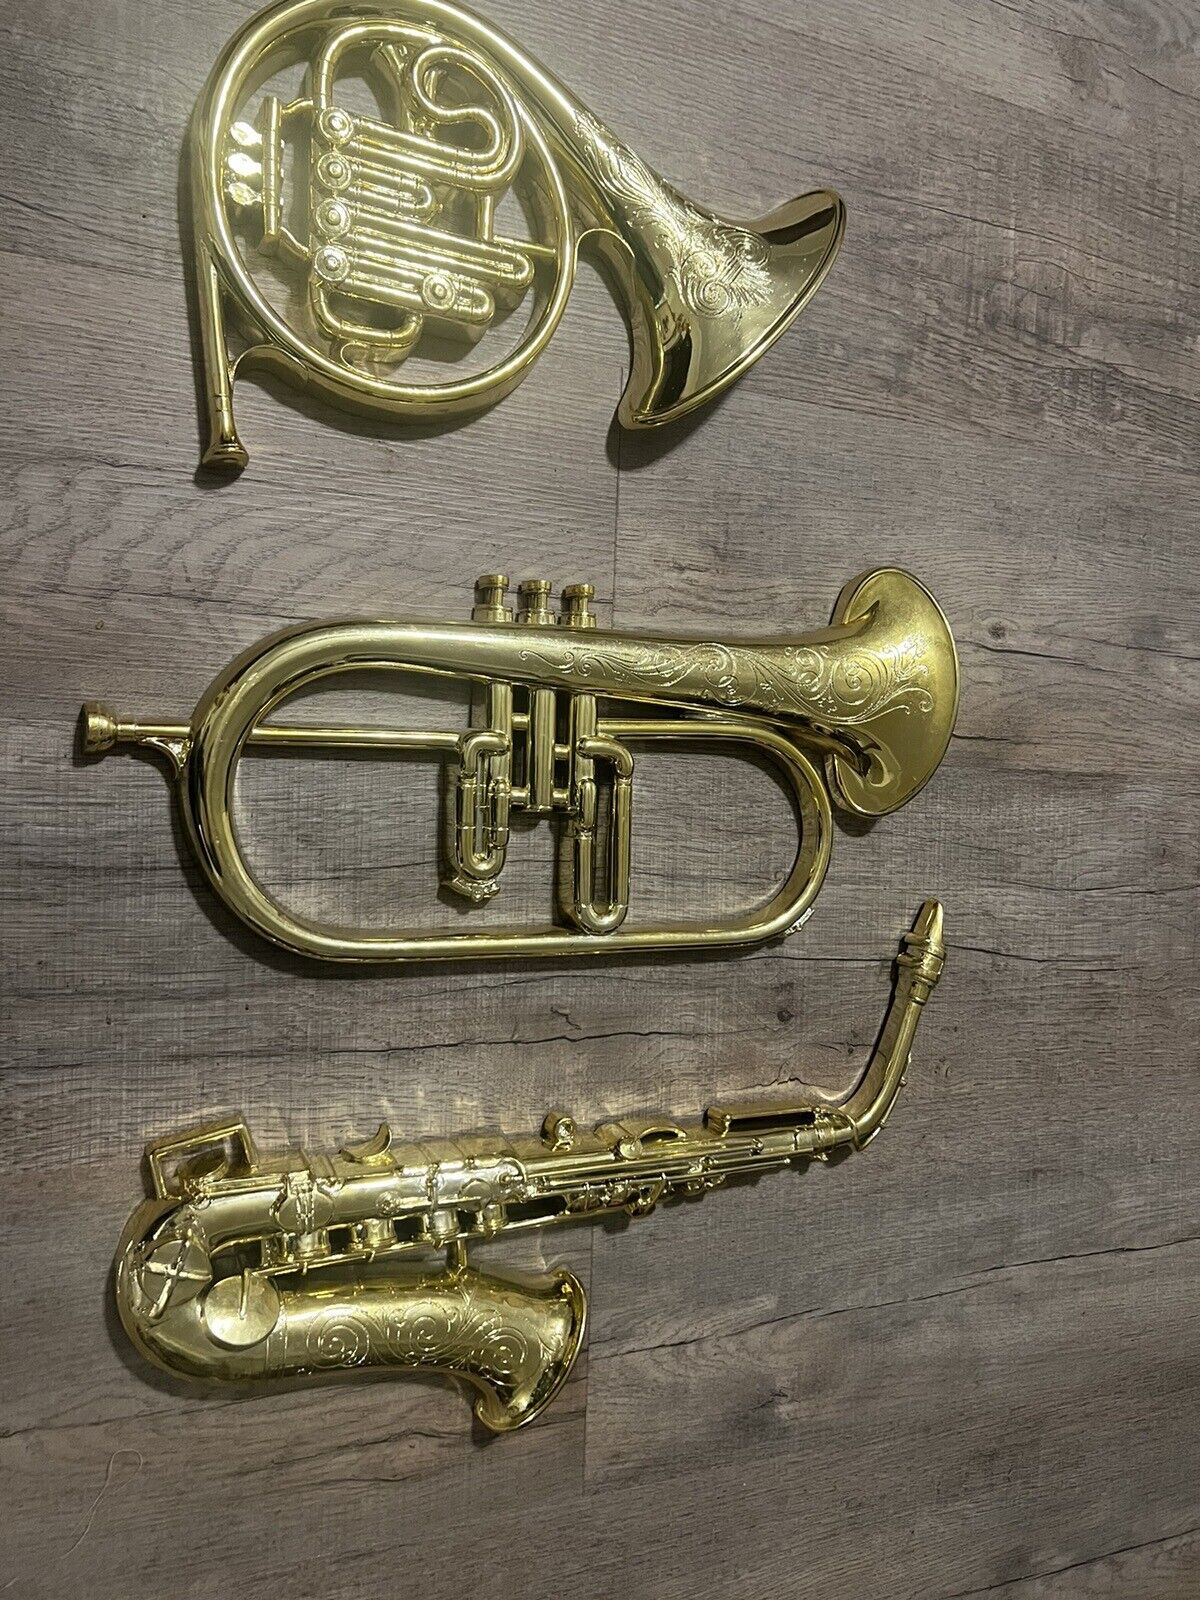 COMPLETE SET 1978 Syroco Musical Instruments Wall Hangings 7562 Horn Trumpet Sax